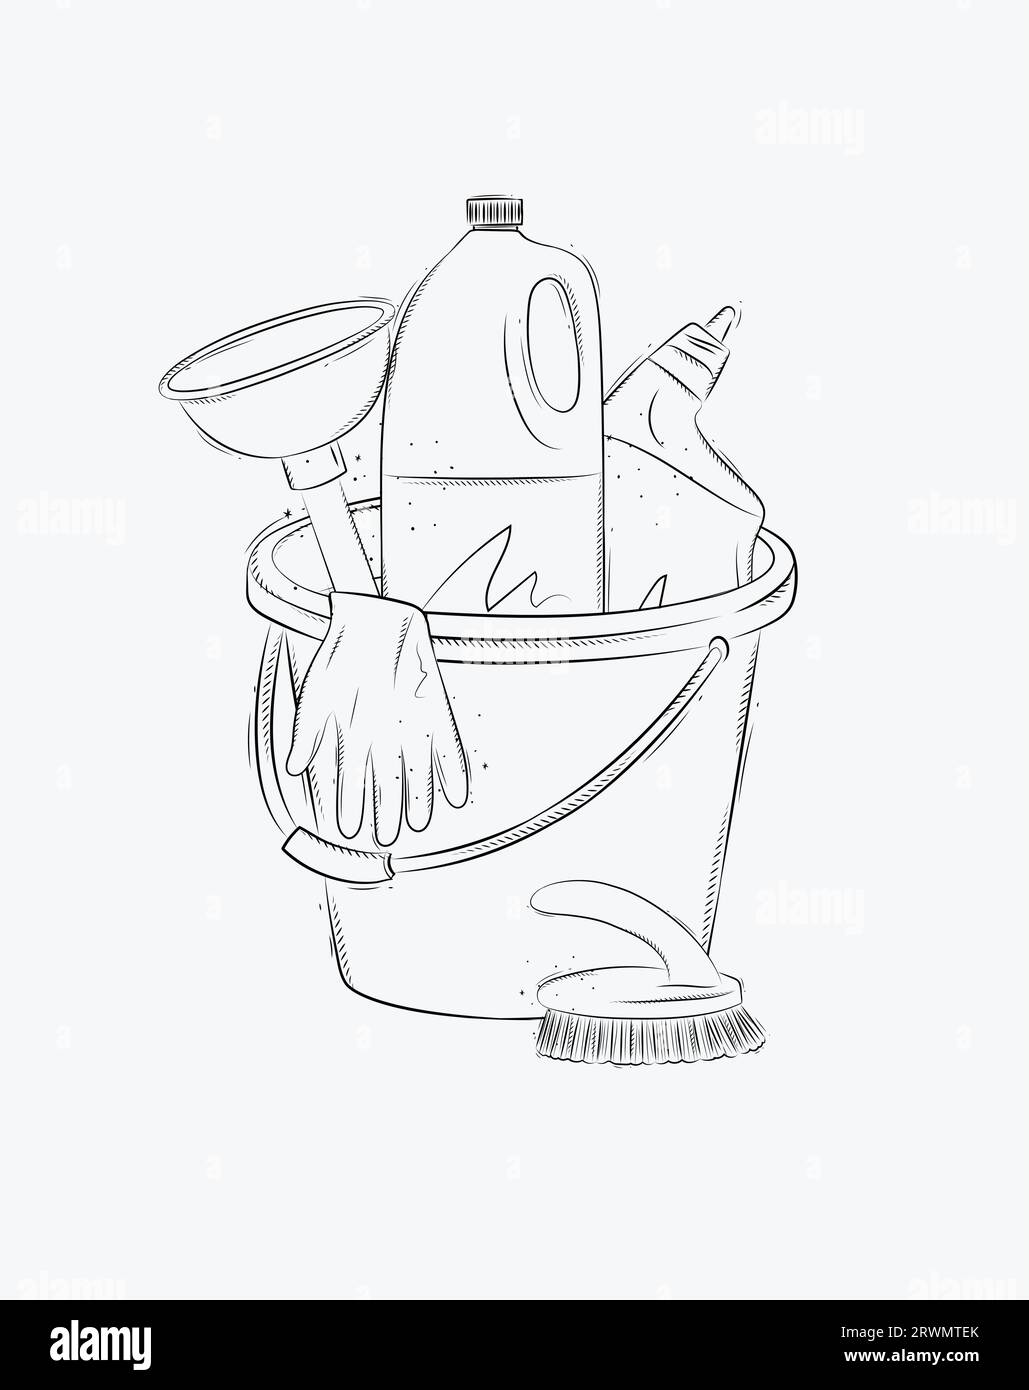 Cleaning bathroom supplies tools accessories cleaner, brush, bucket, plunger, gloves drawing in graphic style on white background Stock Vector